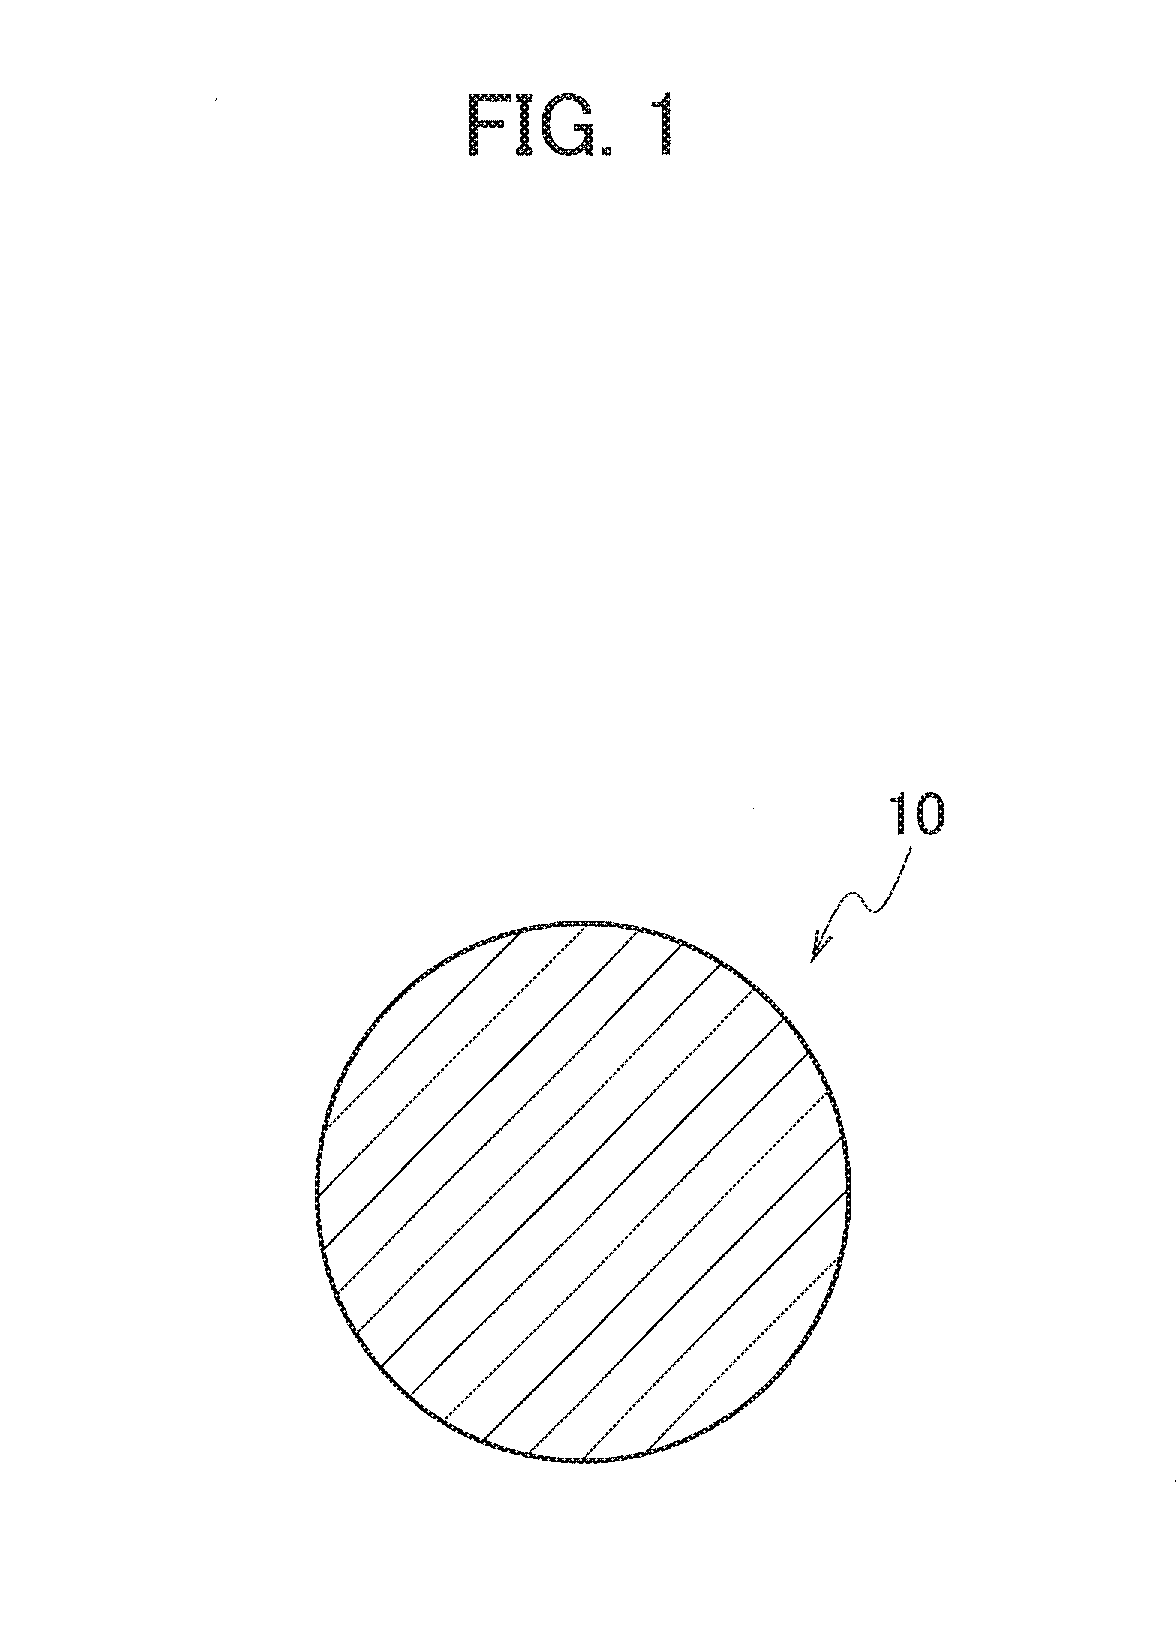 Crystal direction control of alloyed aluminum wire, alloyed aluminum electric wire, and wire harness using same